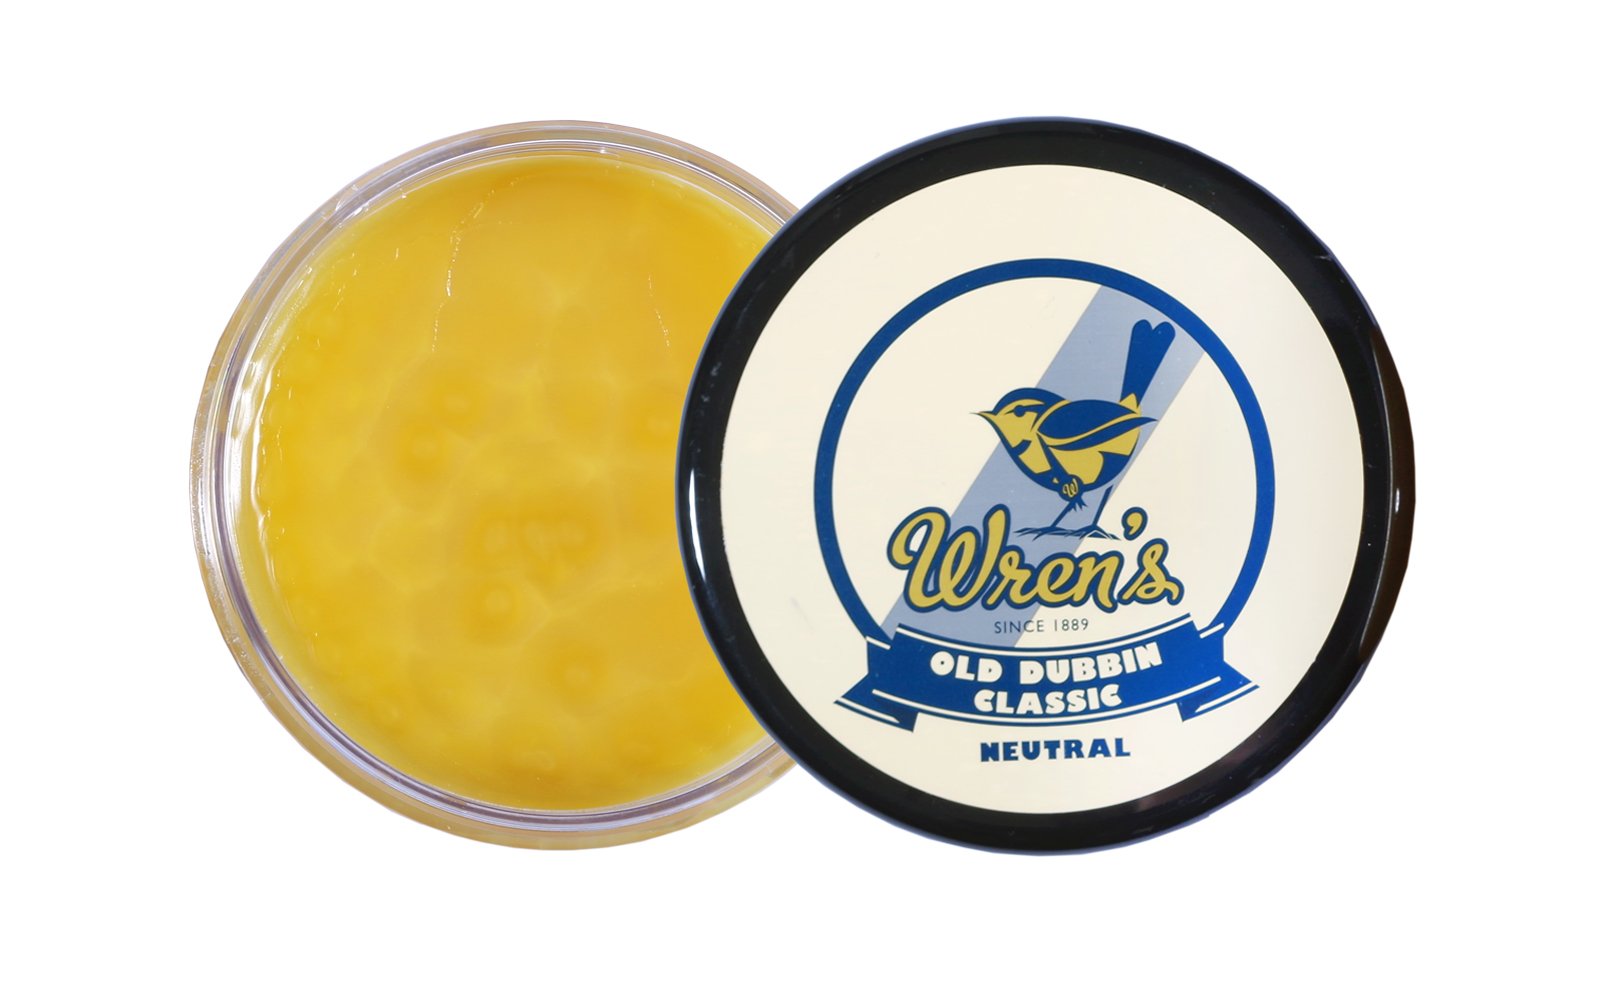 Shoe Boot Grease Dubbin Wax, Nourishment And Waterproofing For Leather,  Wrens